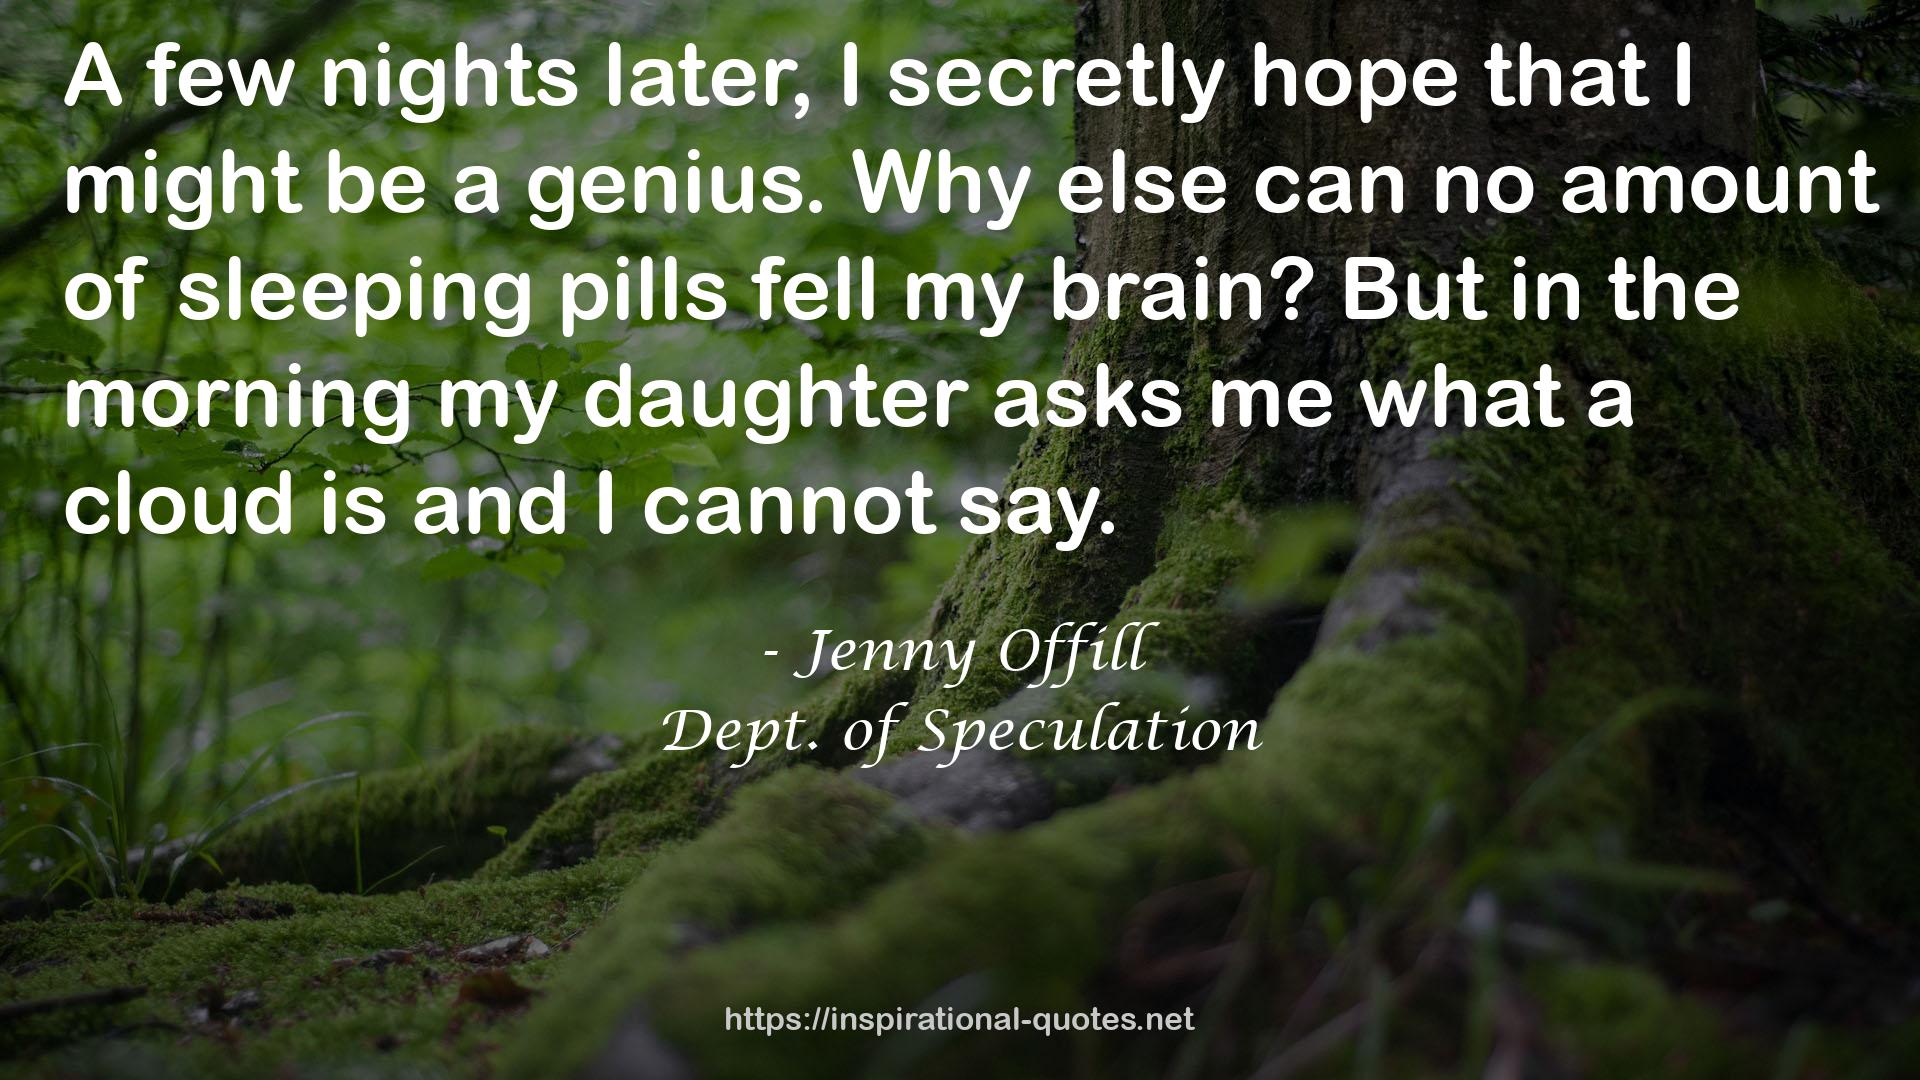 Jenny Offill QUOTES